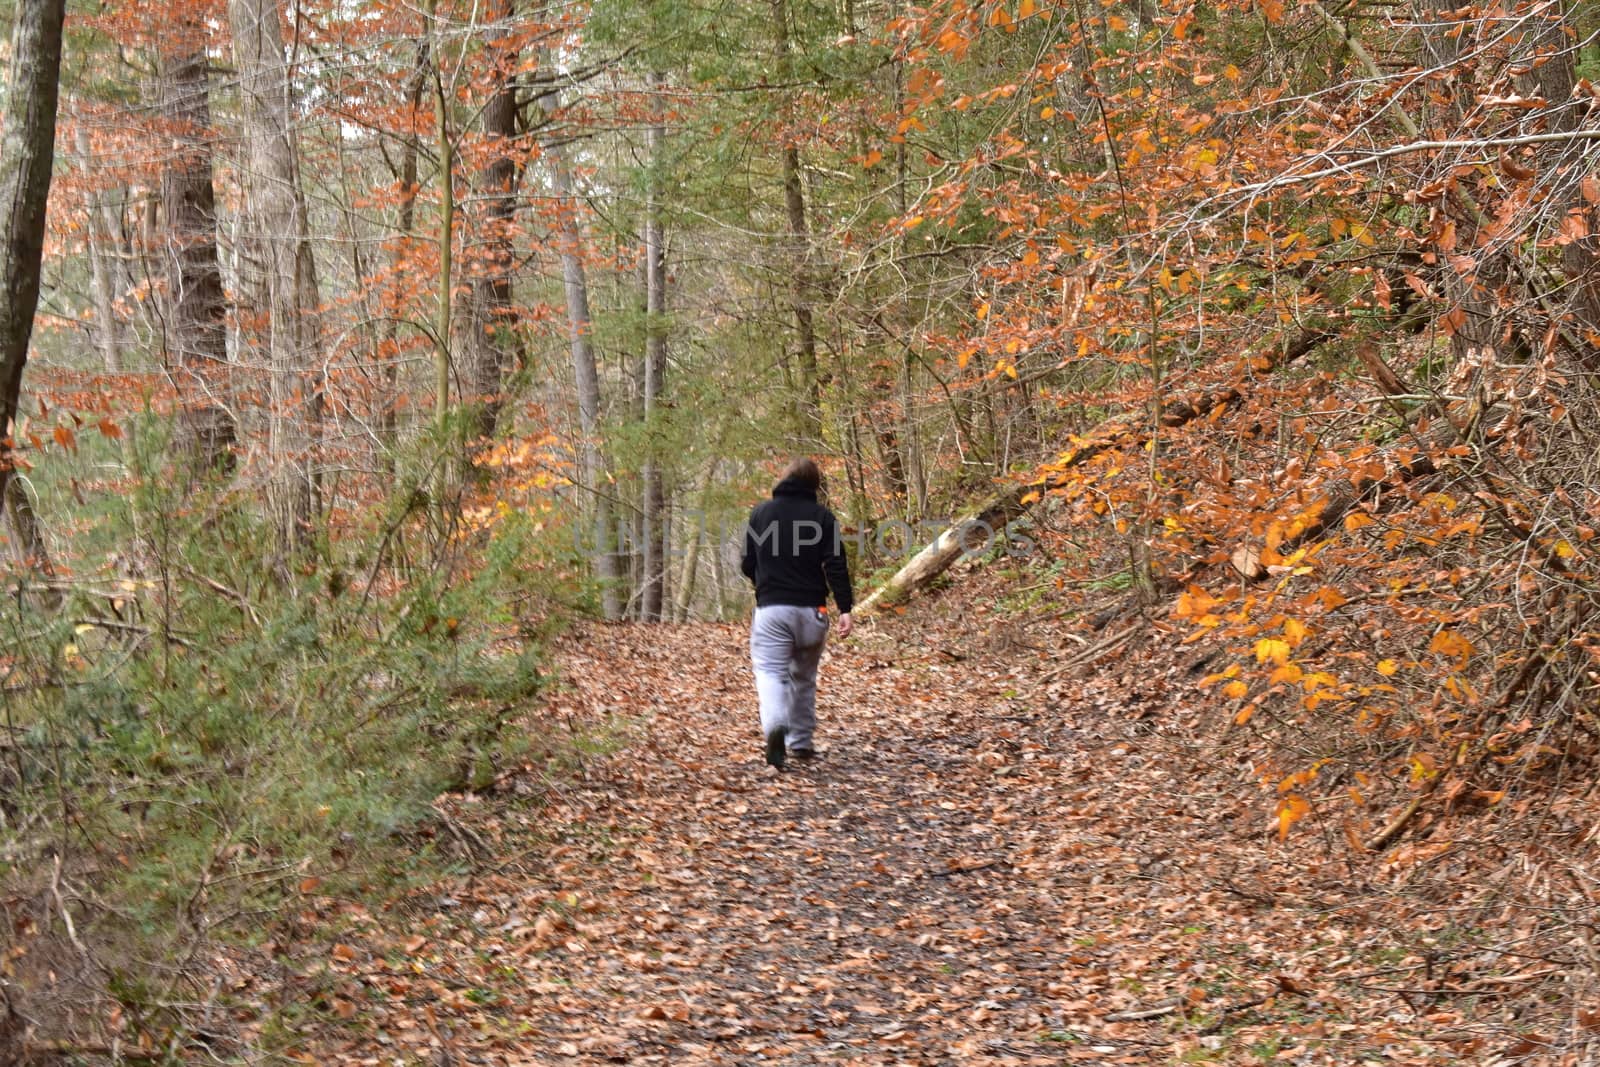 A Man in a Black Hoodie Walking Through an Autumn Forest by bju12290